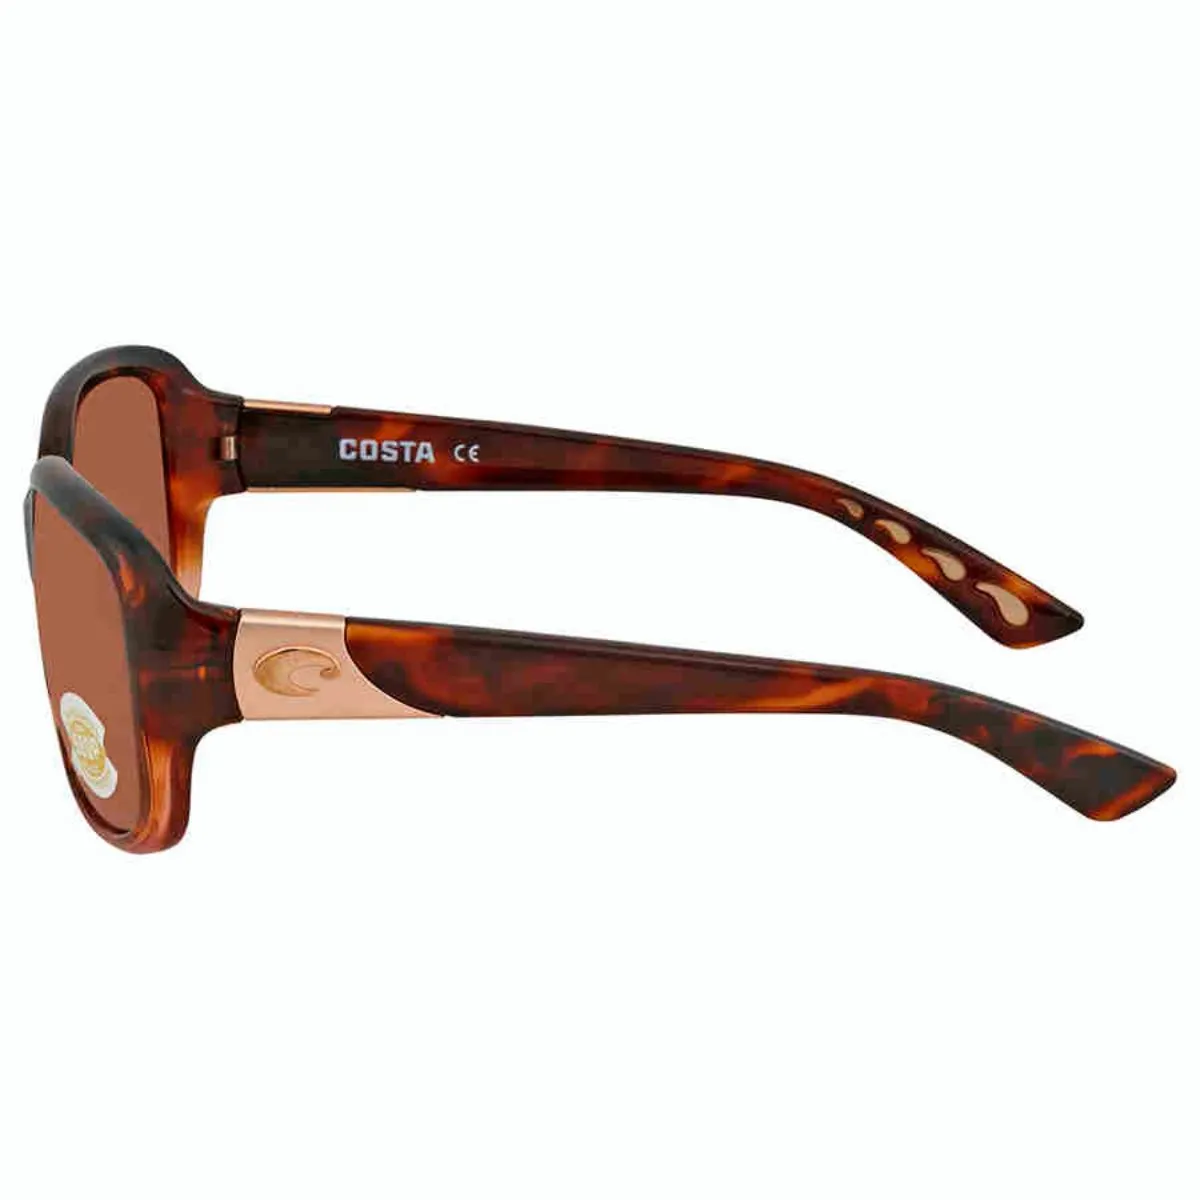 COSTA NAOCALE ISABELA TORTOISE SILVER MIR 580P 